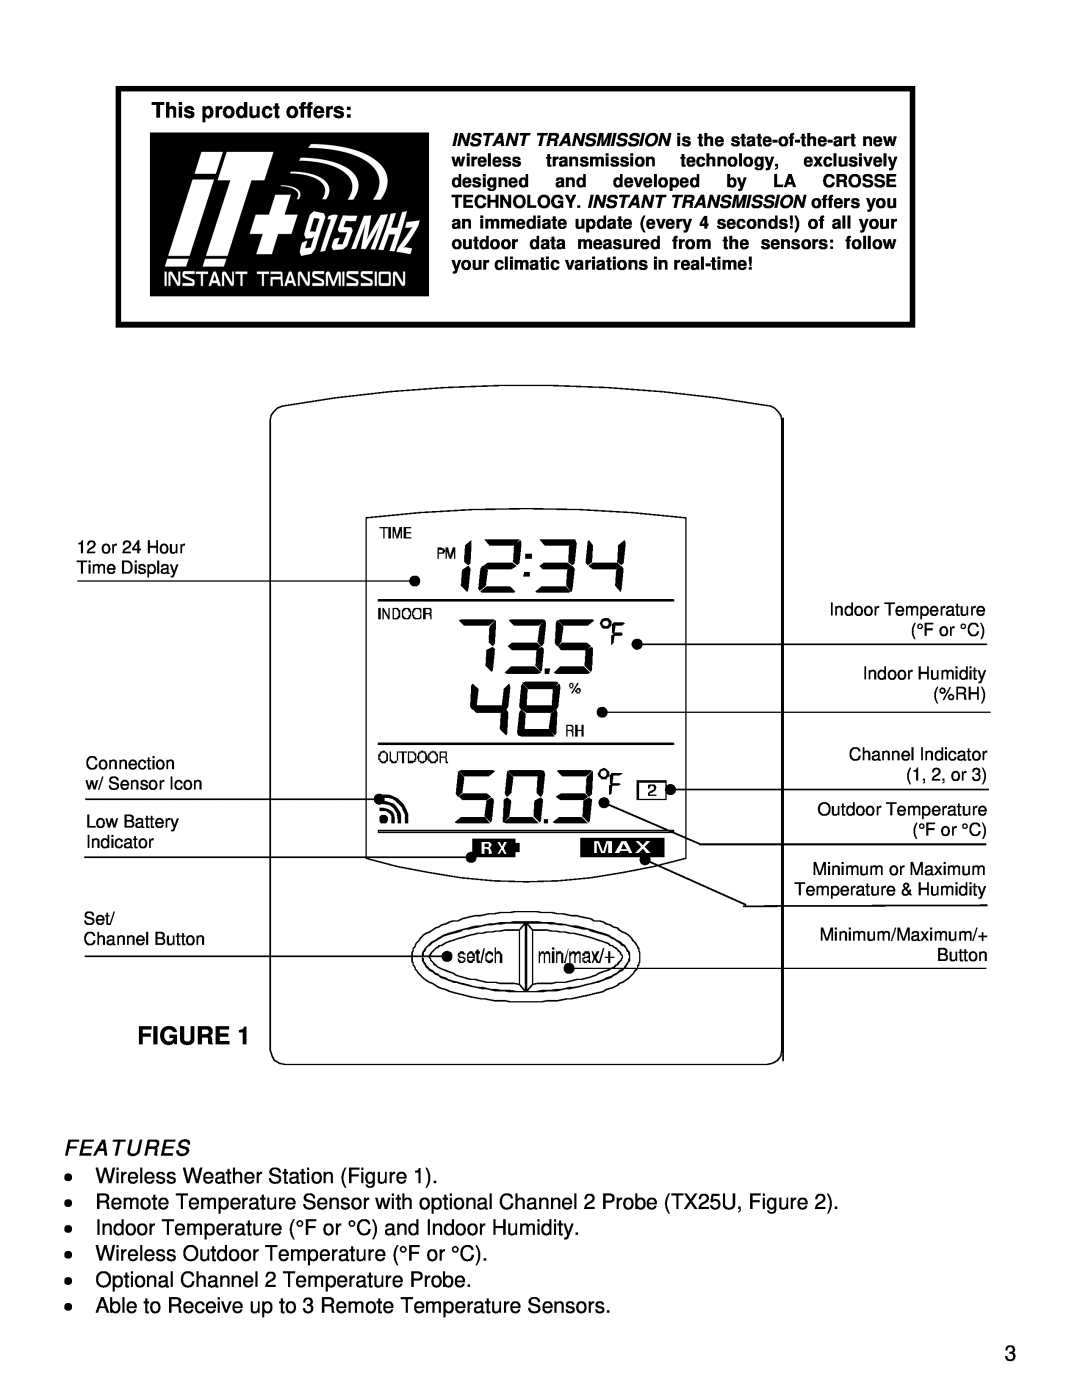 La Crosse Technology WS-9029U instruction manual This product offers, Features 